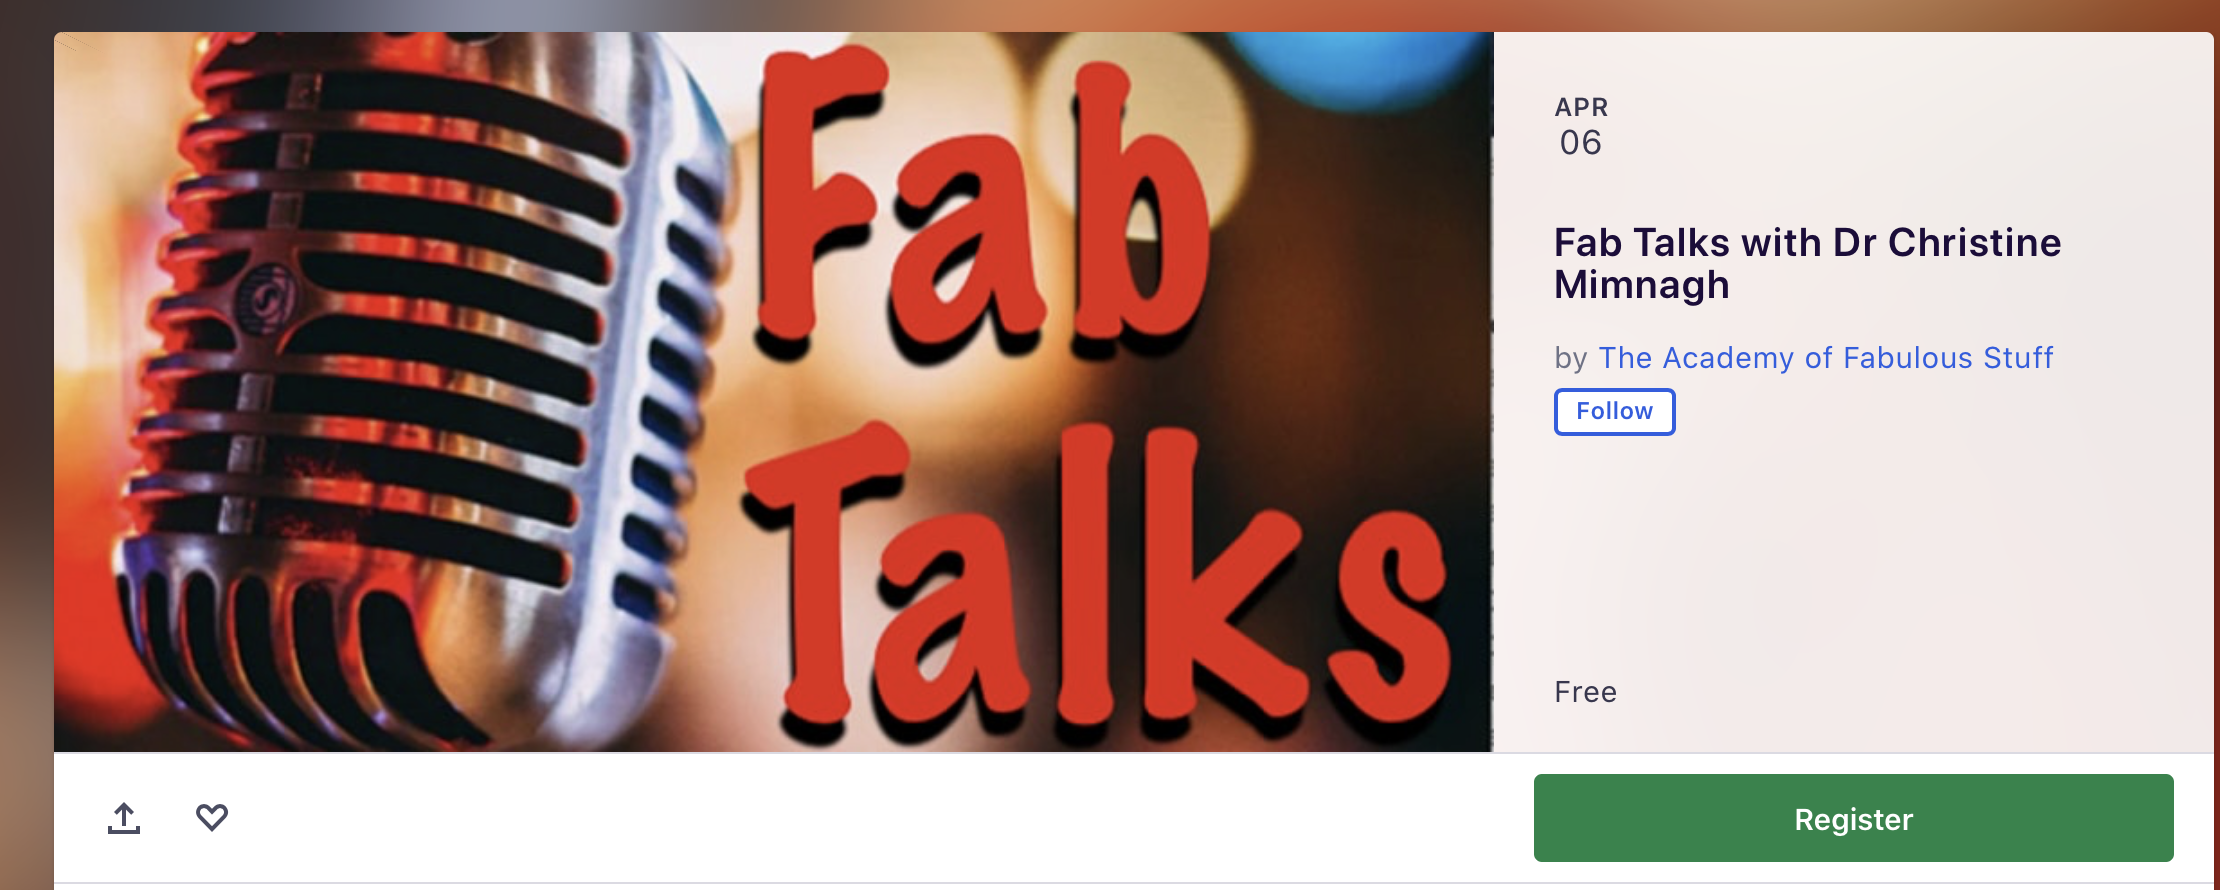 FabTalks - in conversation with Dr Christine Mimnagh featured image